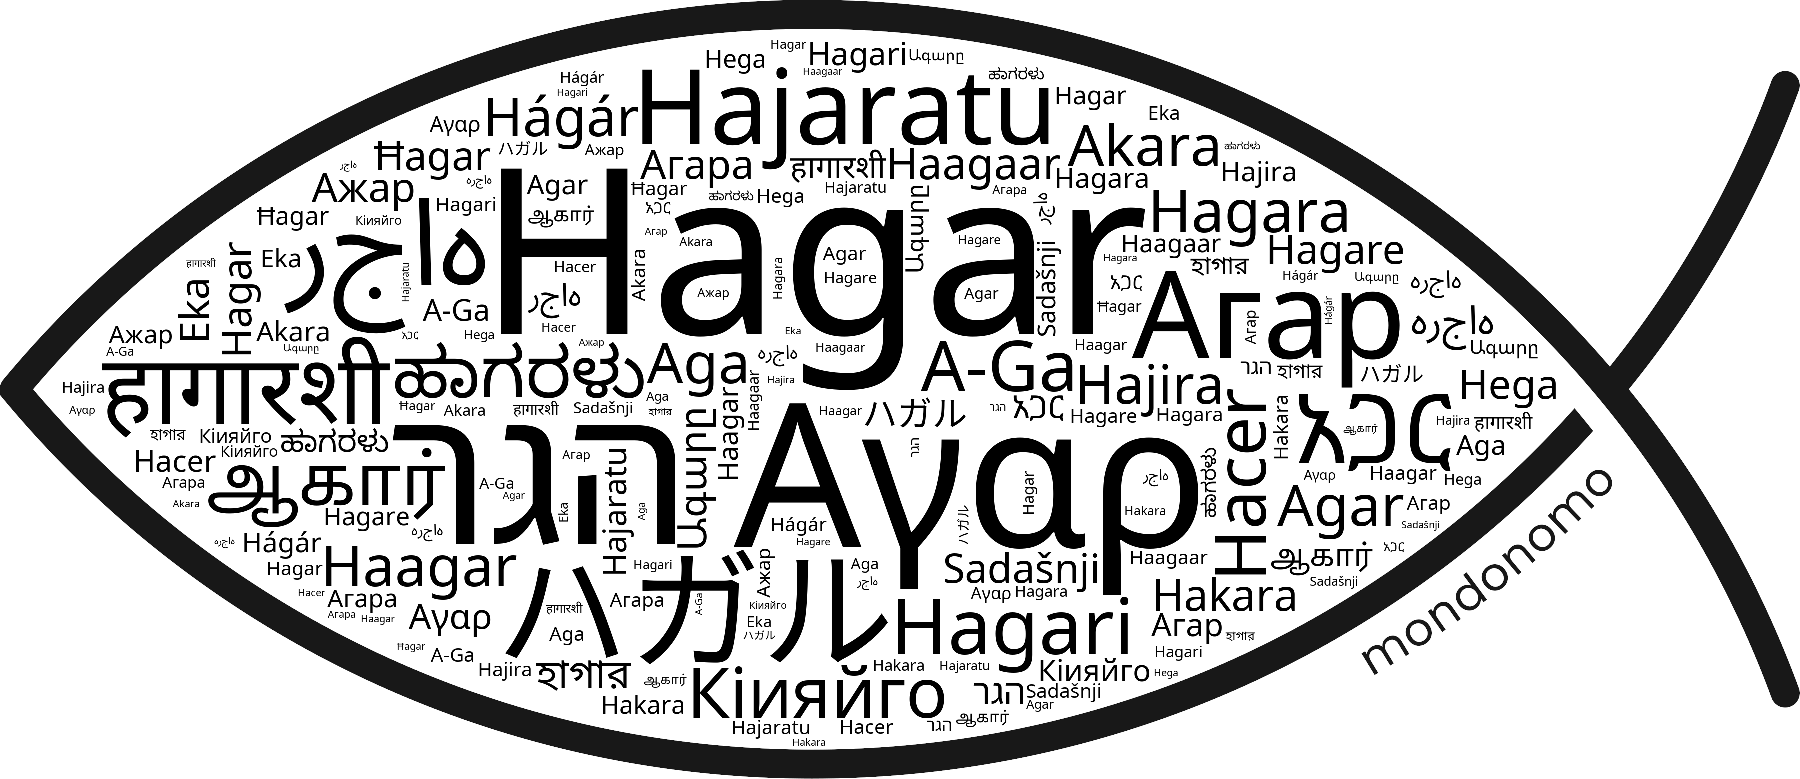 Name Hagar in the world's Bibles